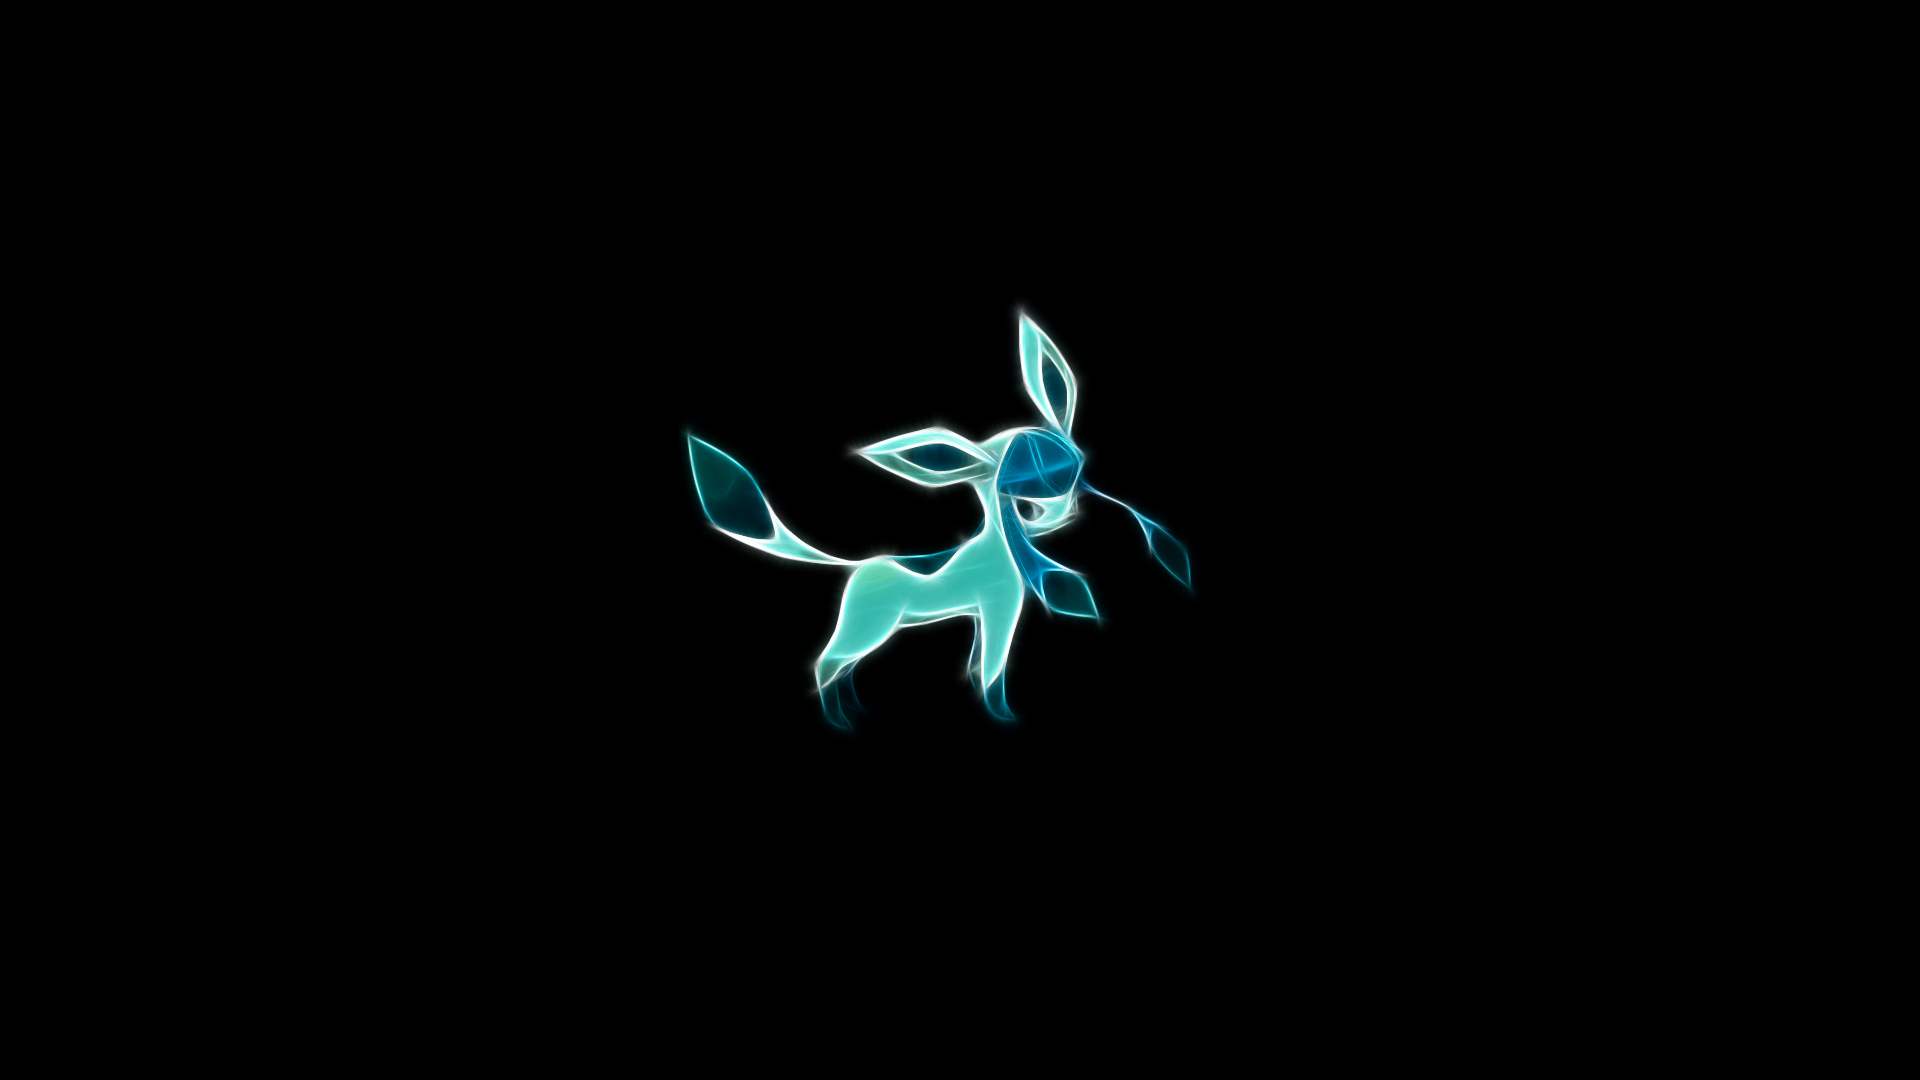 The Pokemon Anime Wallpaper Titled Glaceon